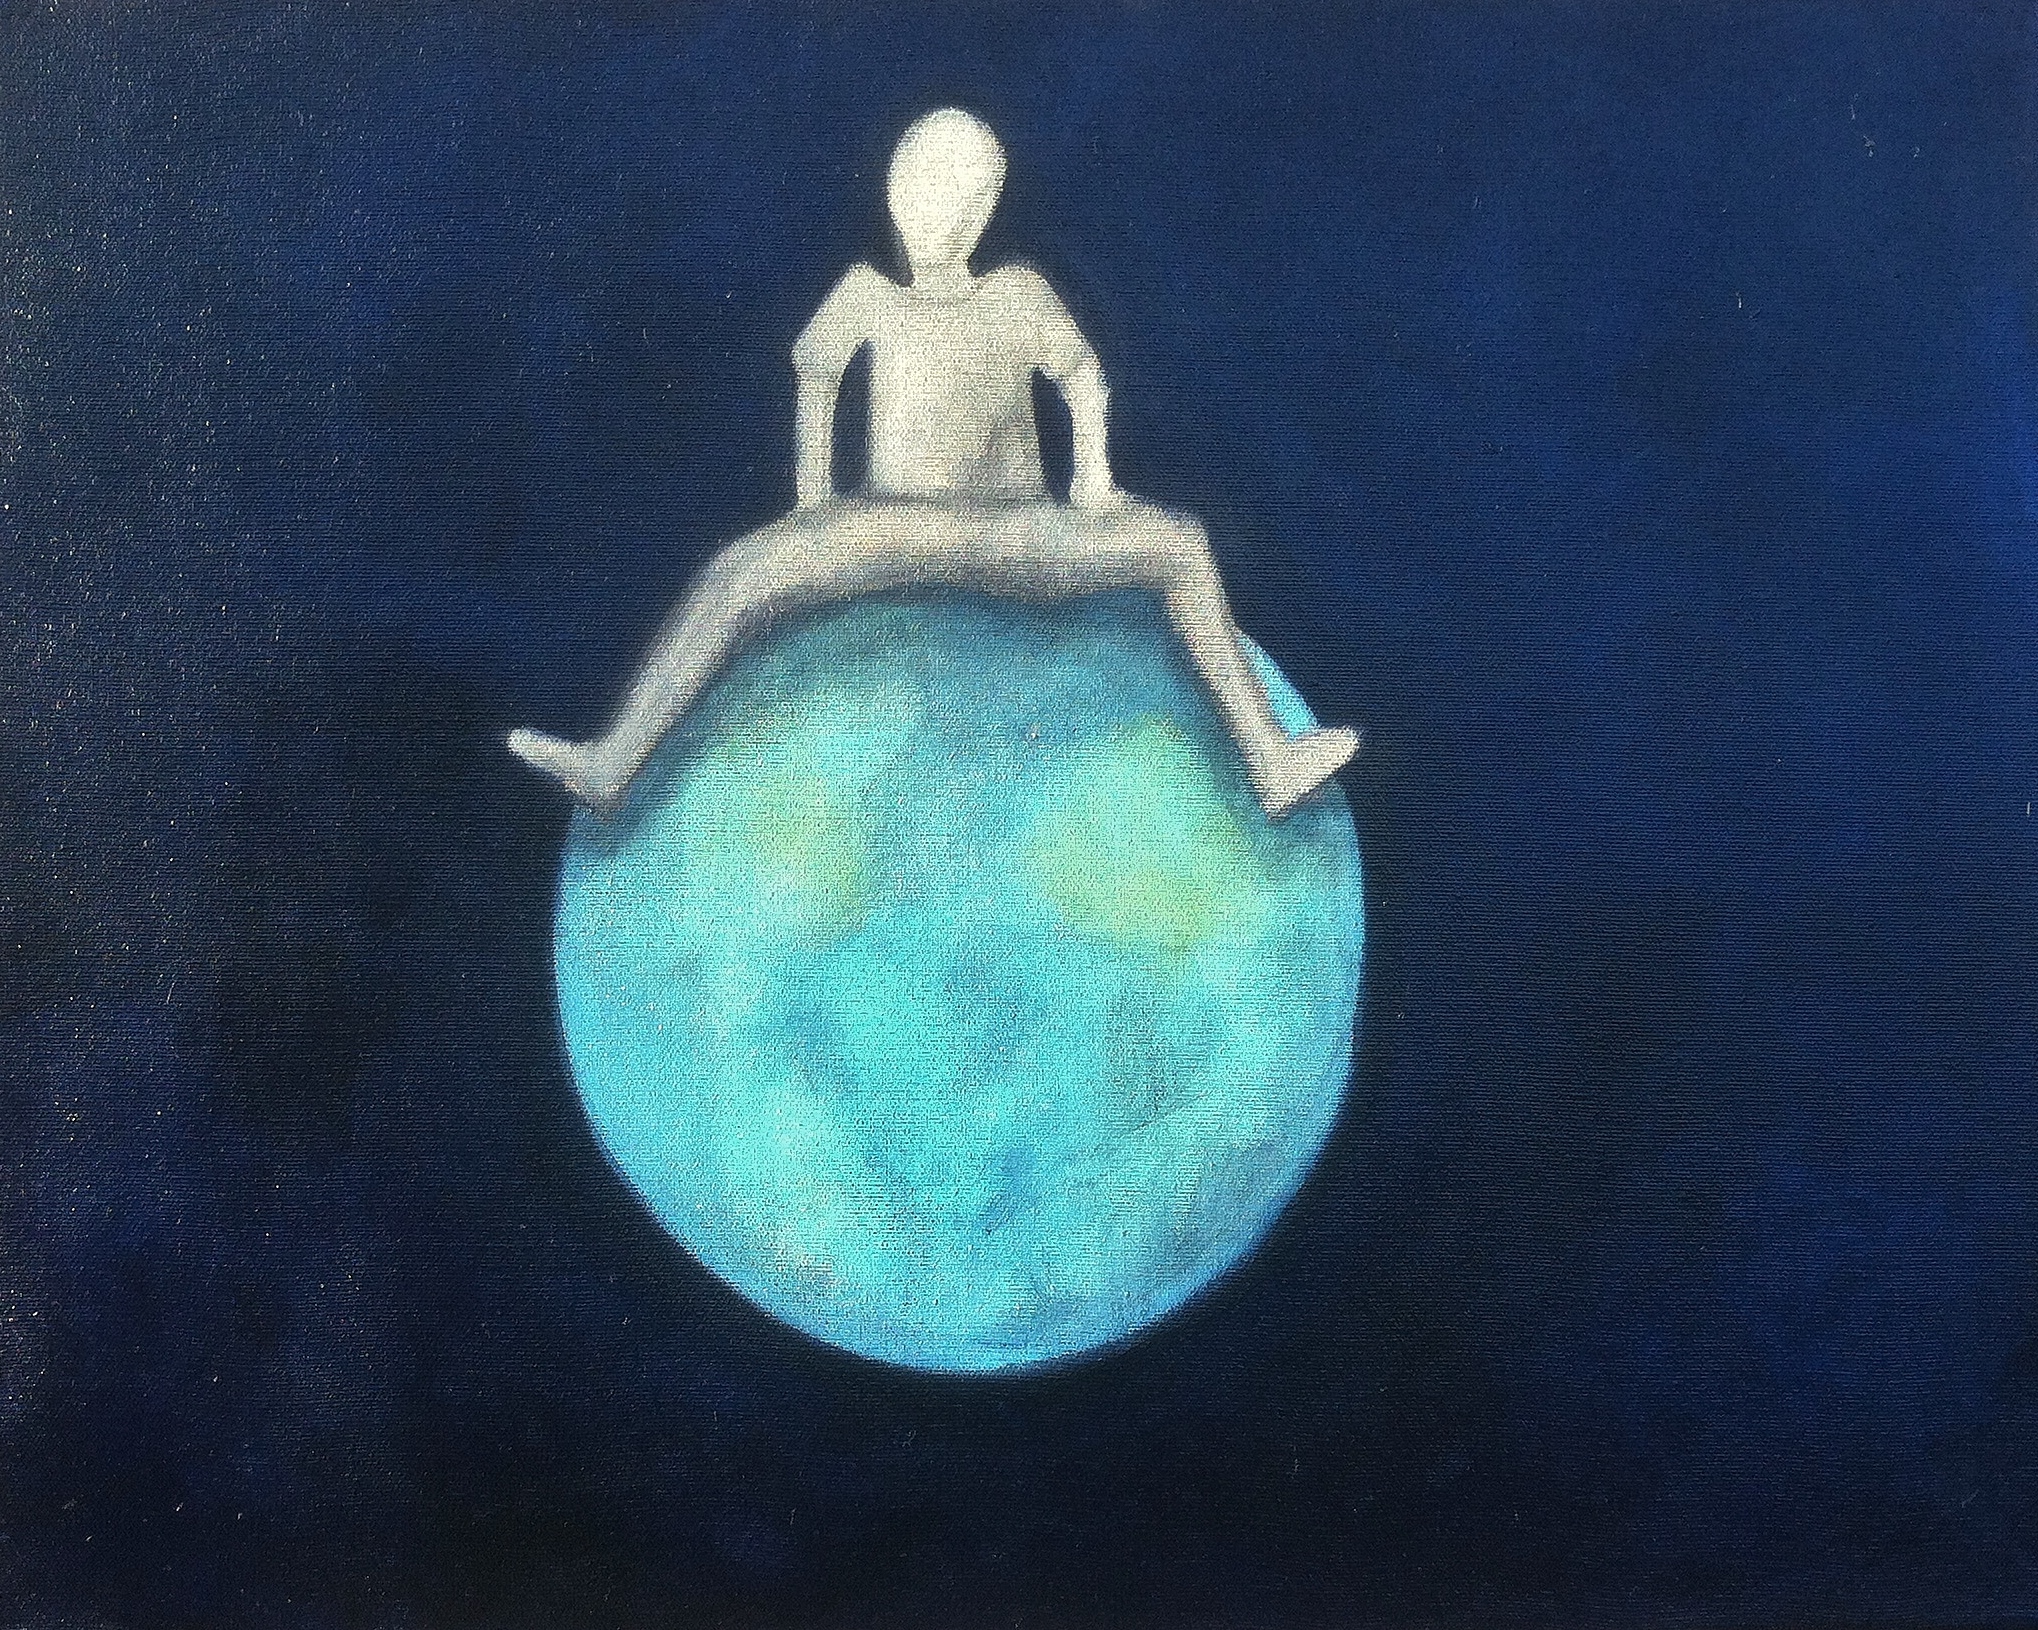 Sittin' on Top of the World by artist Quincy Wakefield